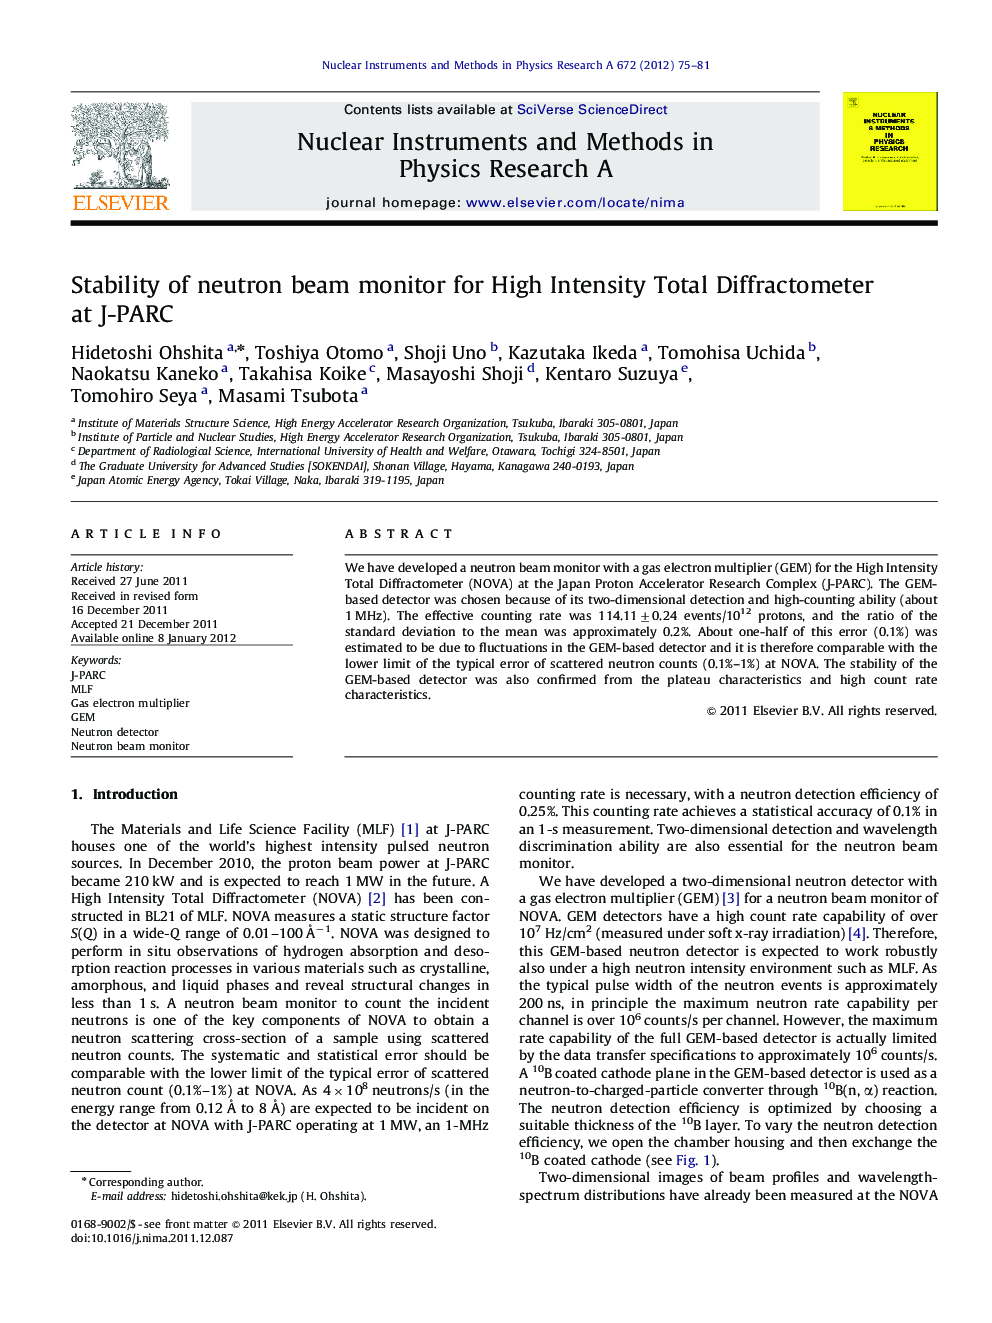 Stability of neutron beam monitor for High Intensity Total Diffractometer at J-PARC